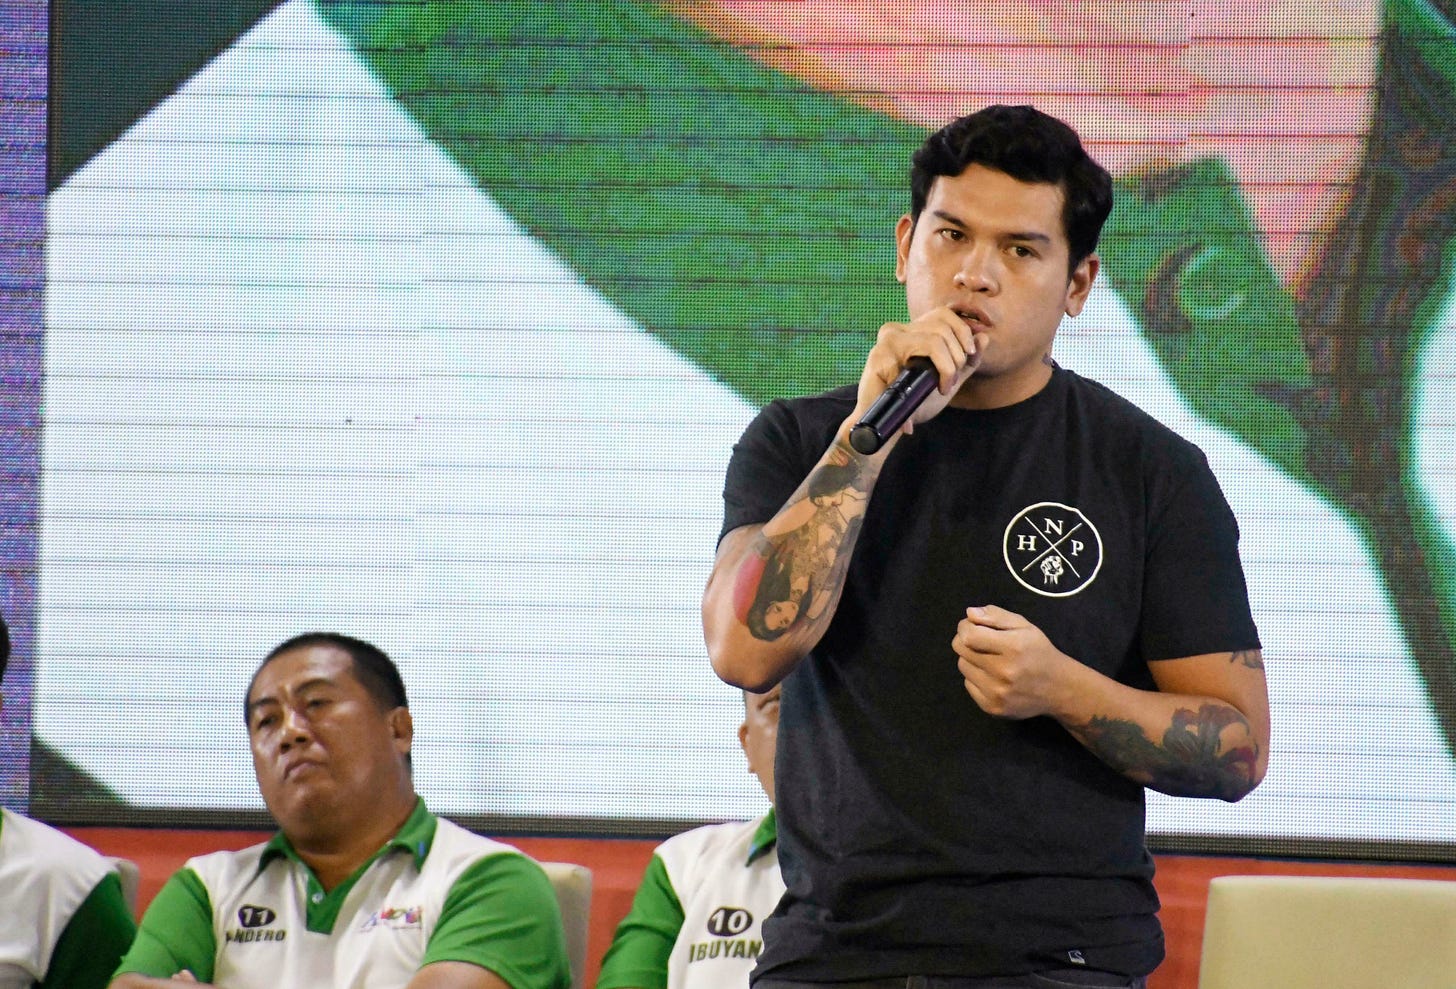 Sebastian Duterte, currently the mayor of Davao City, delivers a speech at a campaign rally in Davao City, the  hometown of his father, then-President Rodrigo Duterte, May 10, 2019.